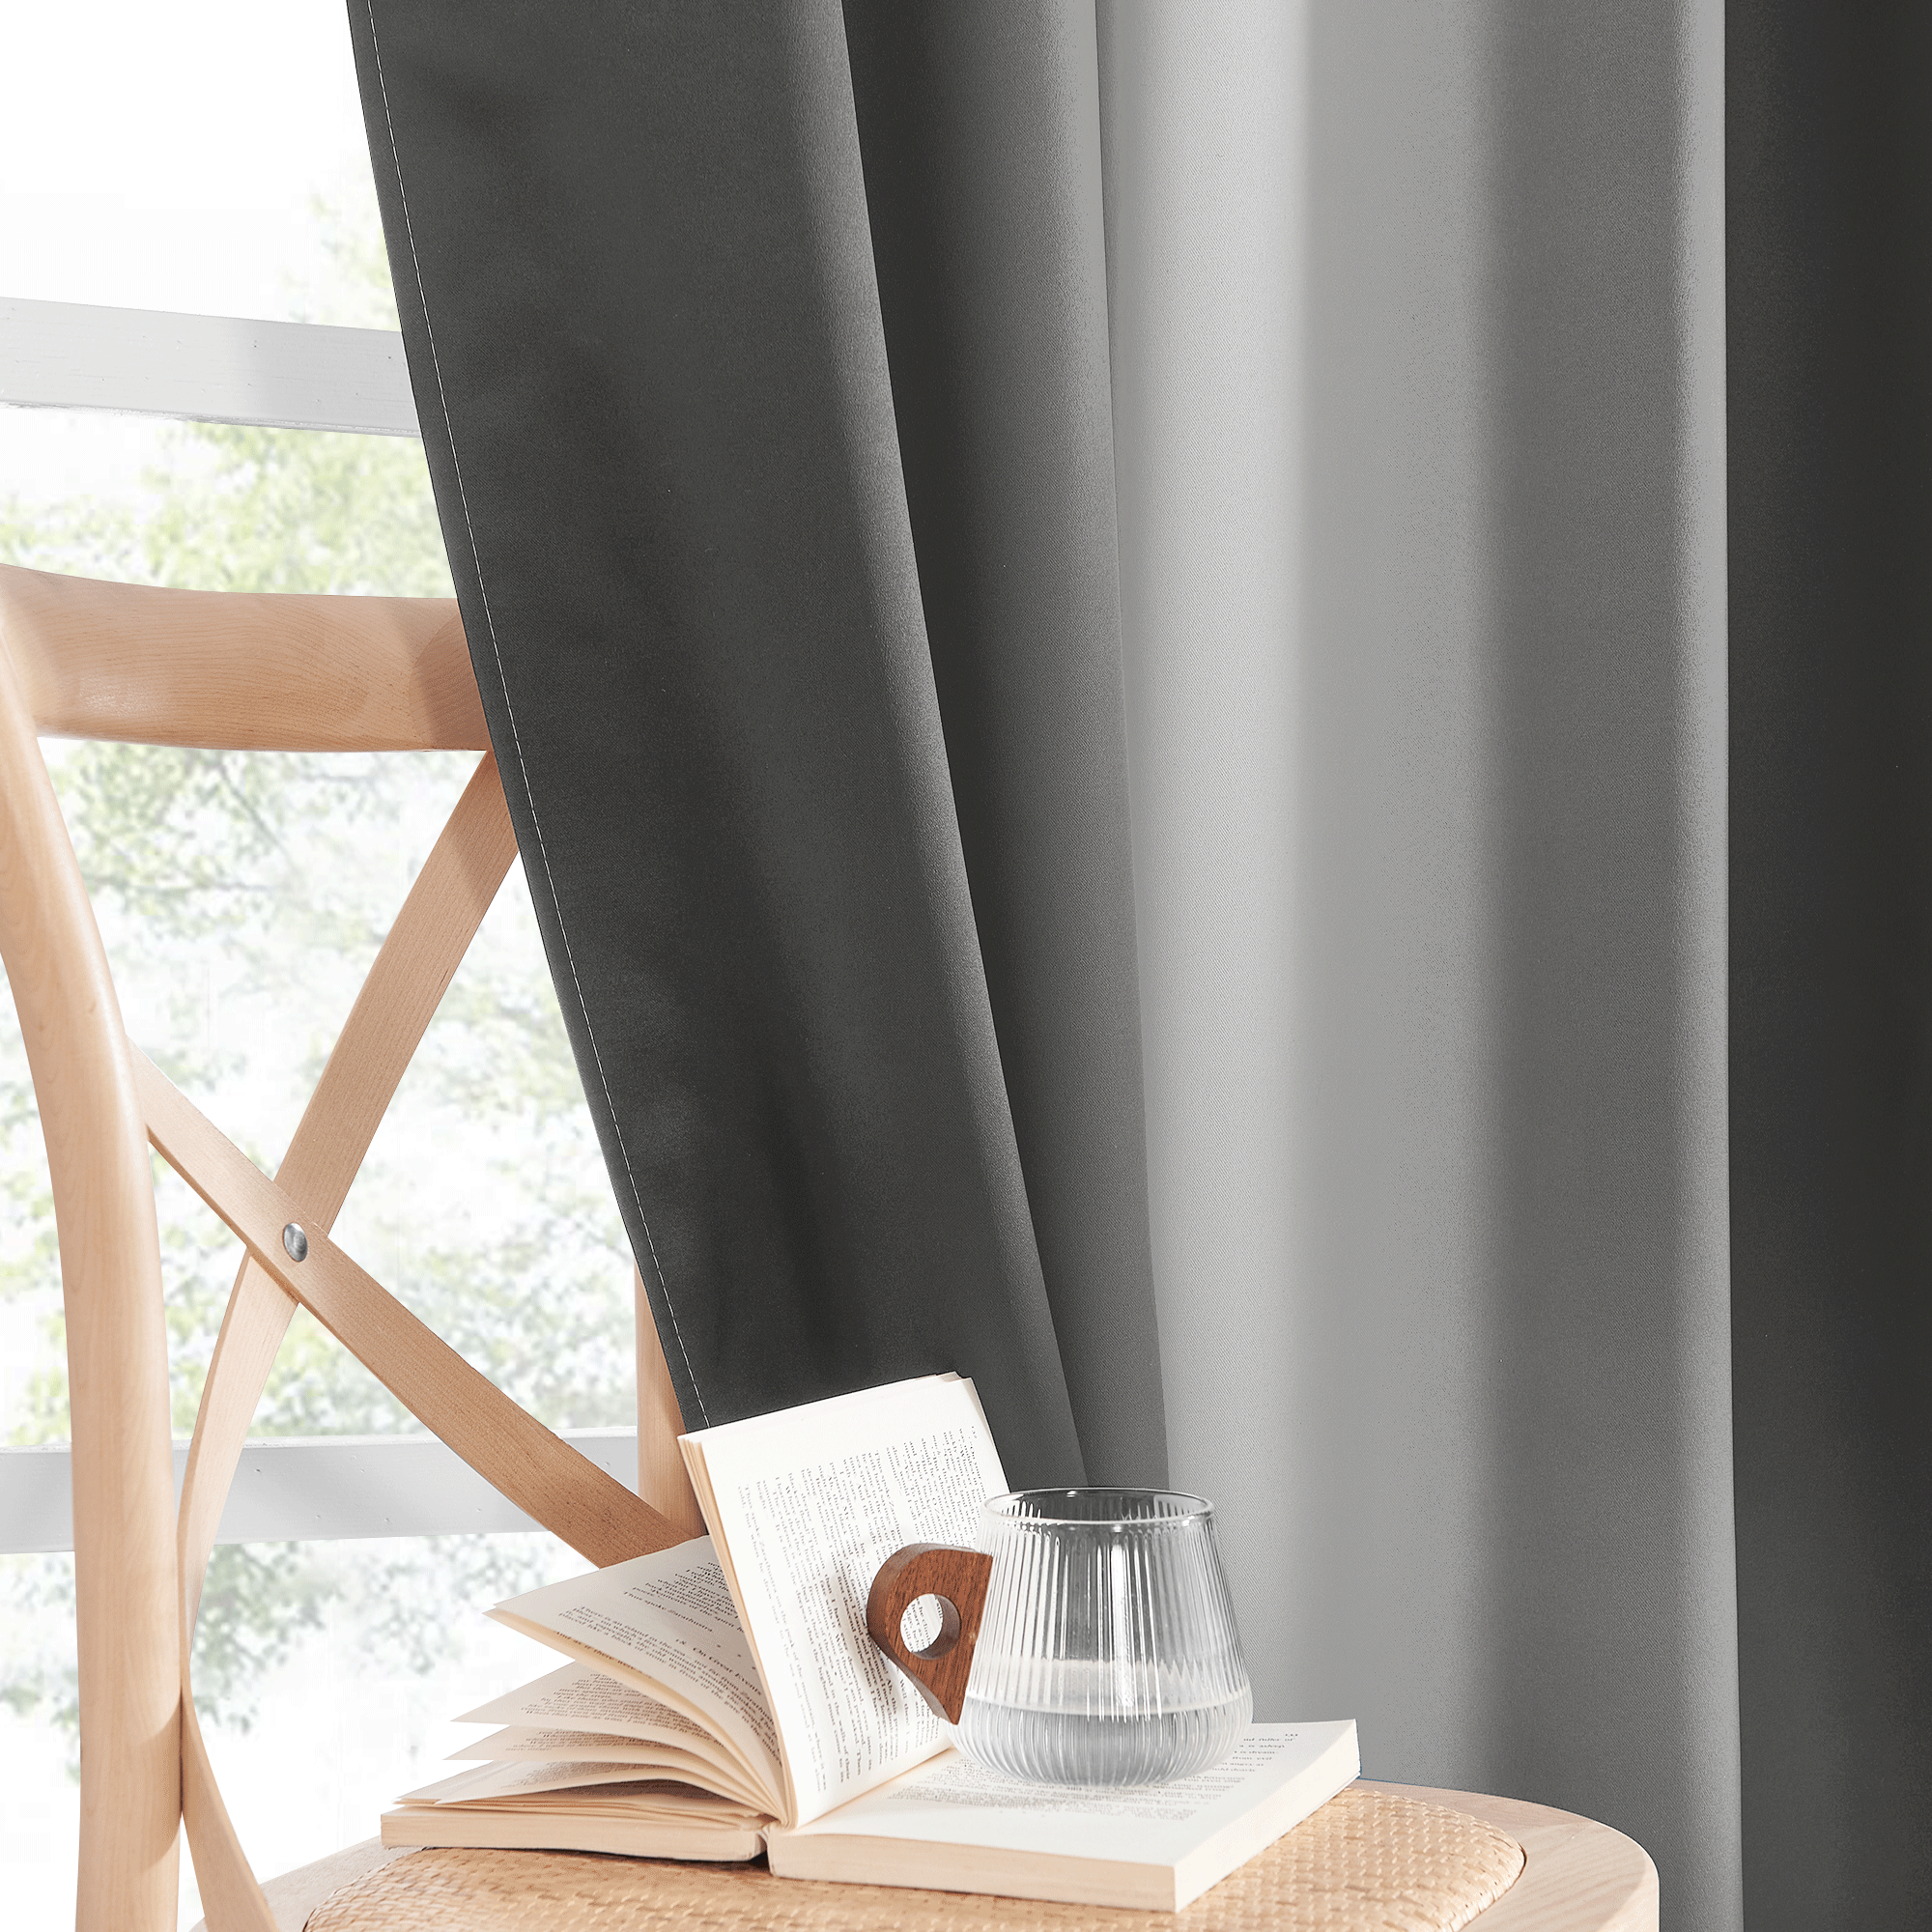 Rod Pocket Gradient Left And Right Blackout Curtains For Living Room And Bedroom 2 Panels KGORGE Store